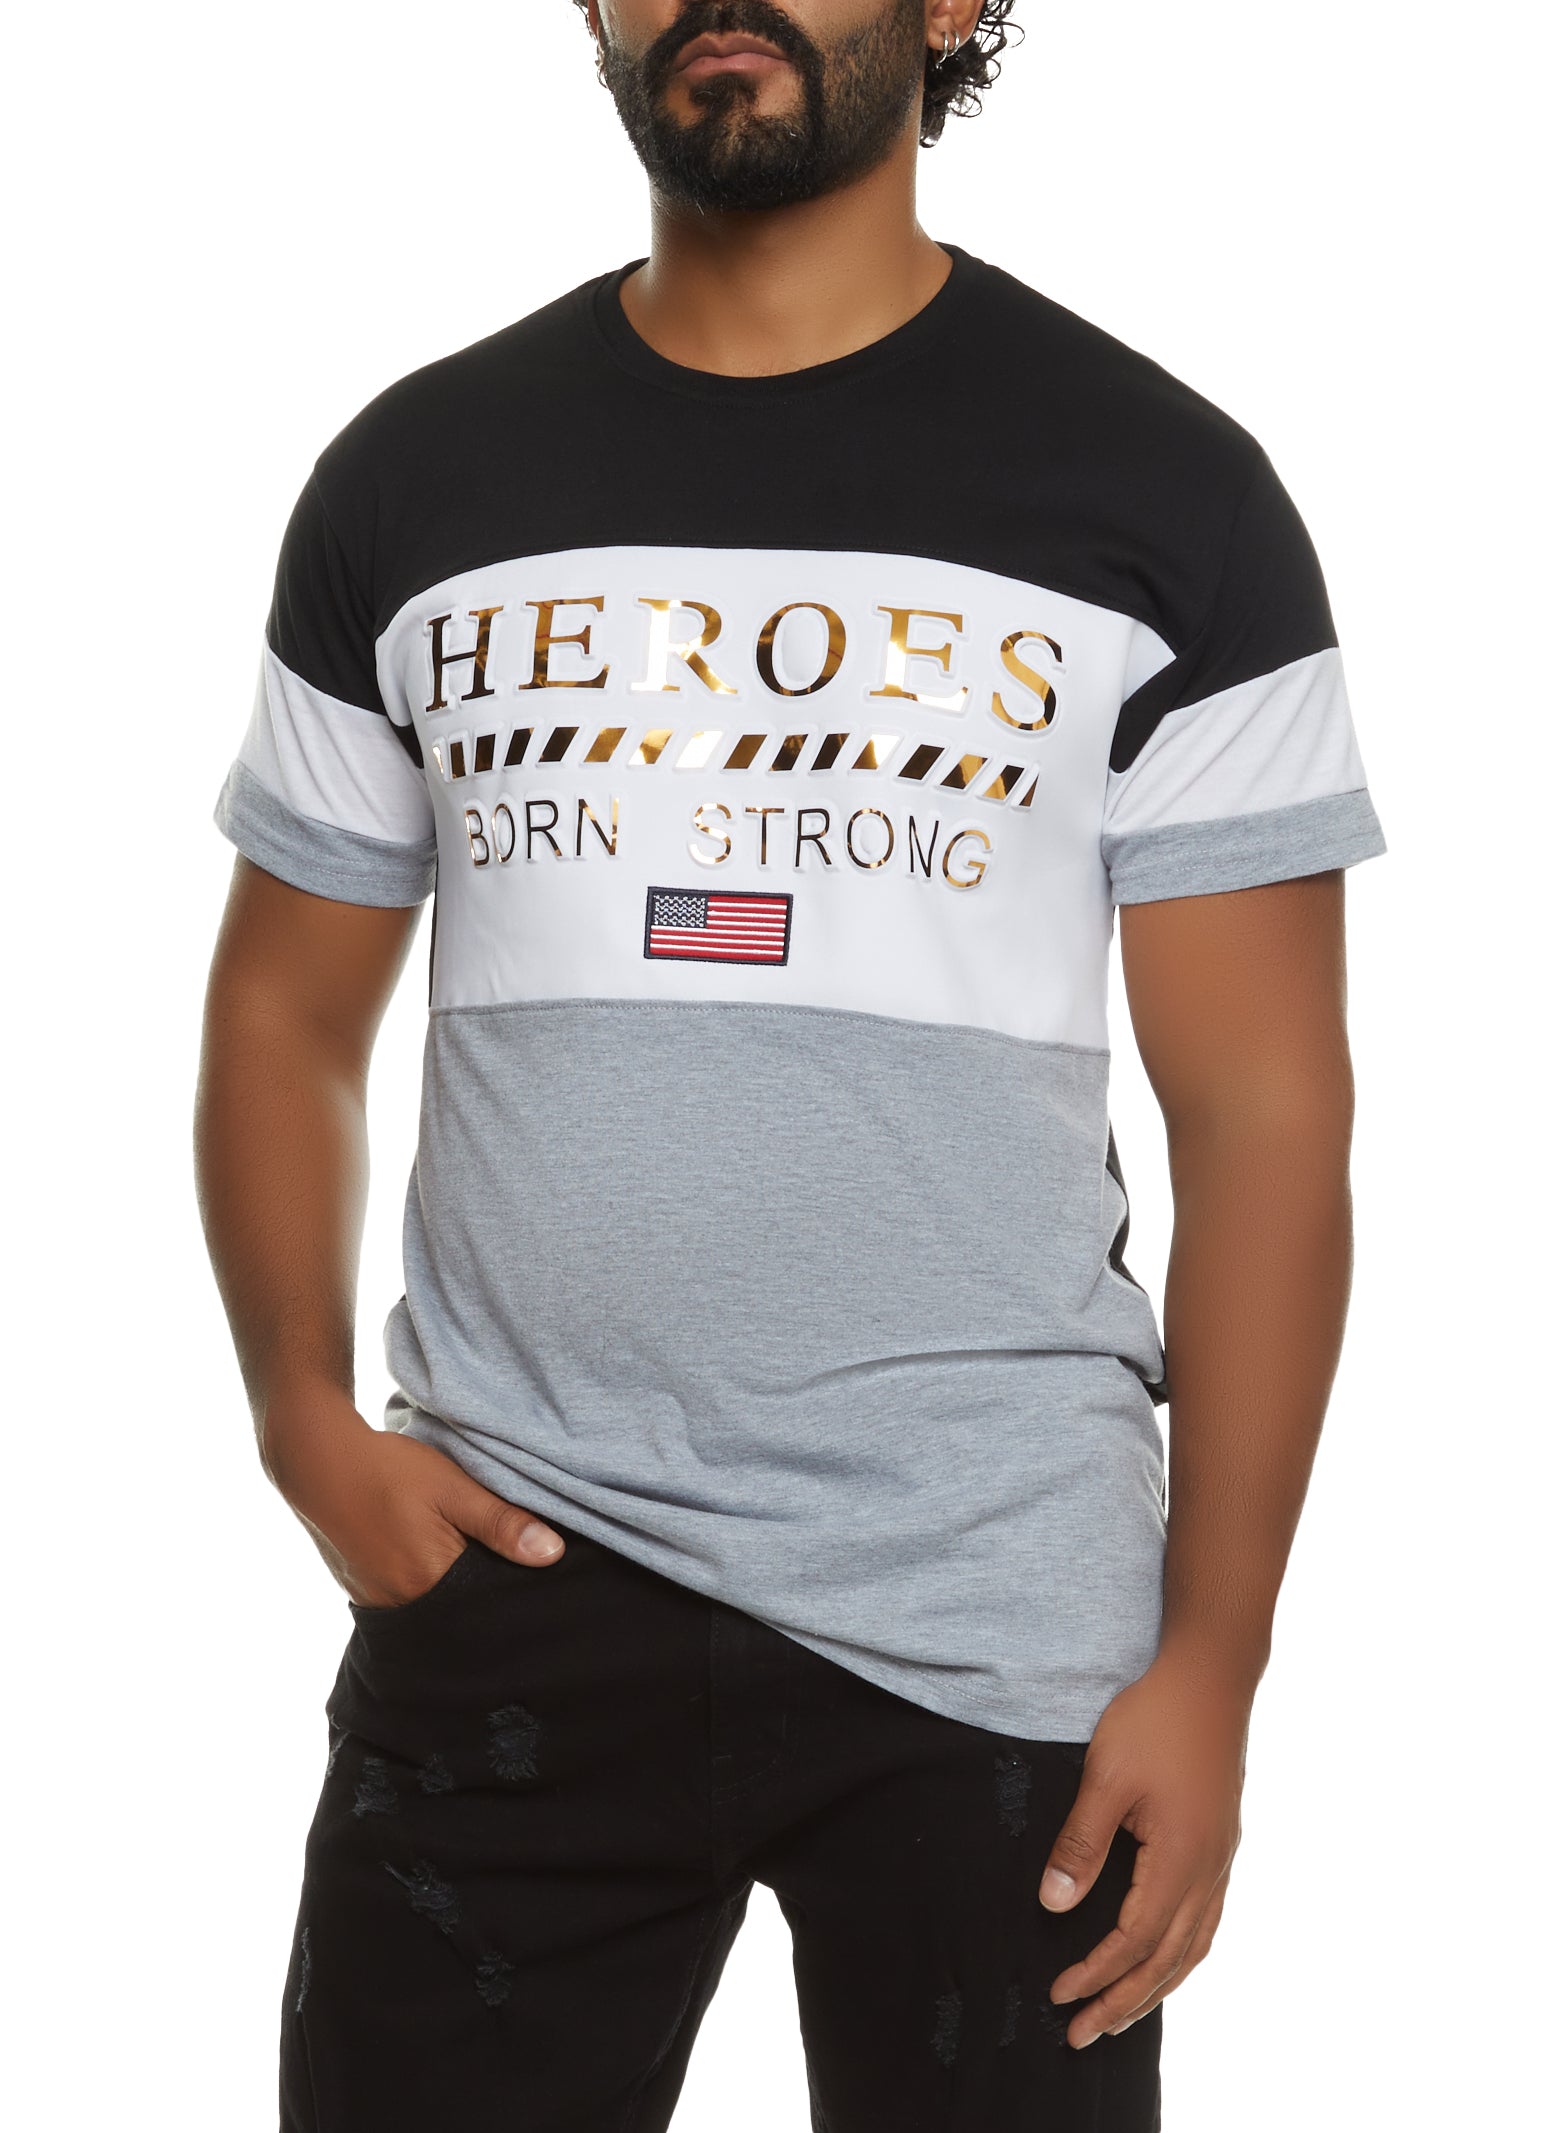 Womens Mens Heroes Born Strong Embossed Foil Screen Tee,